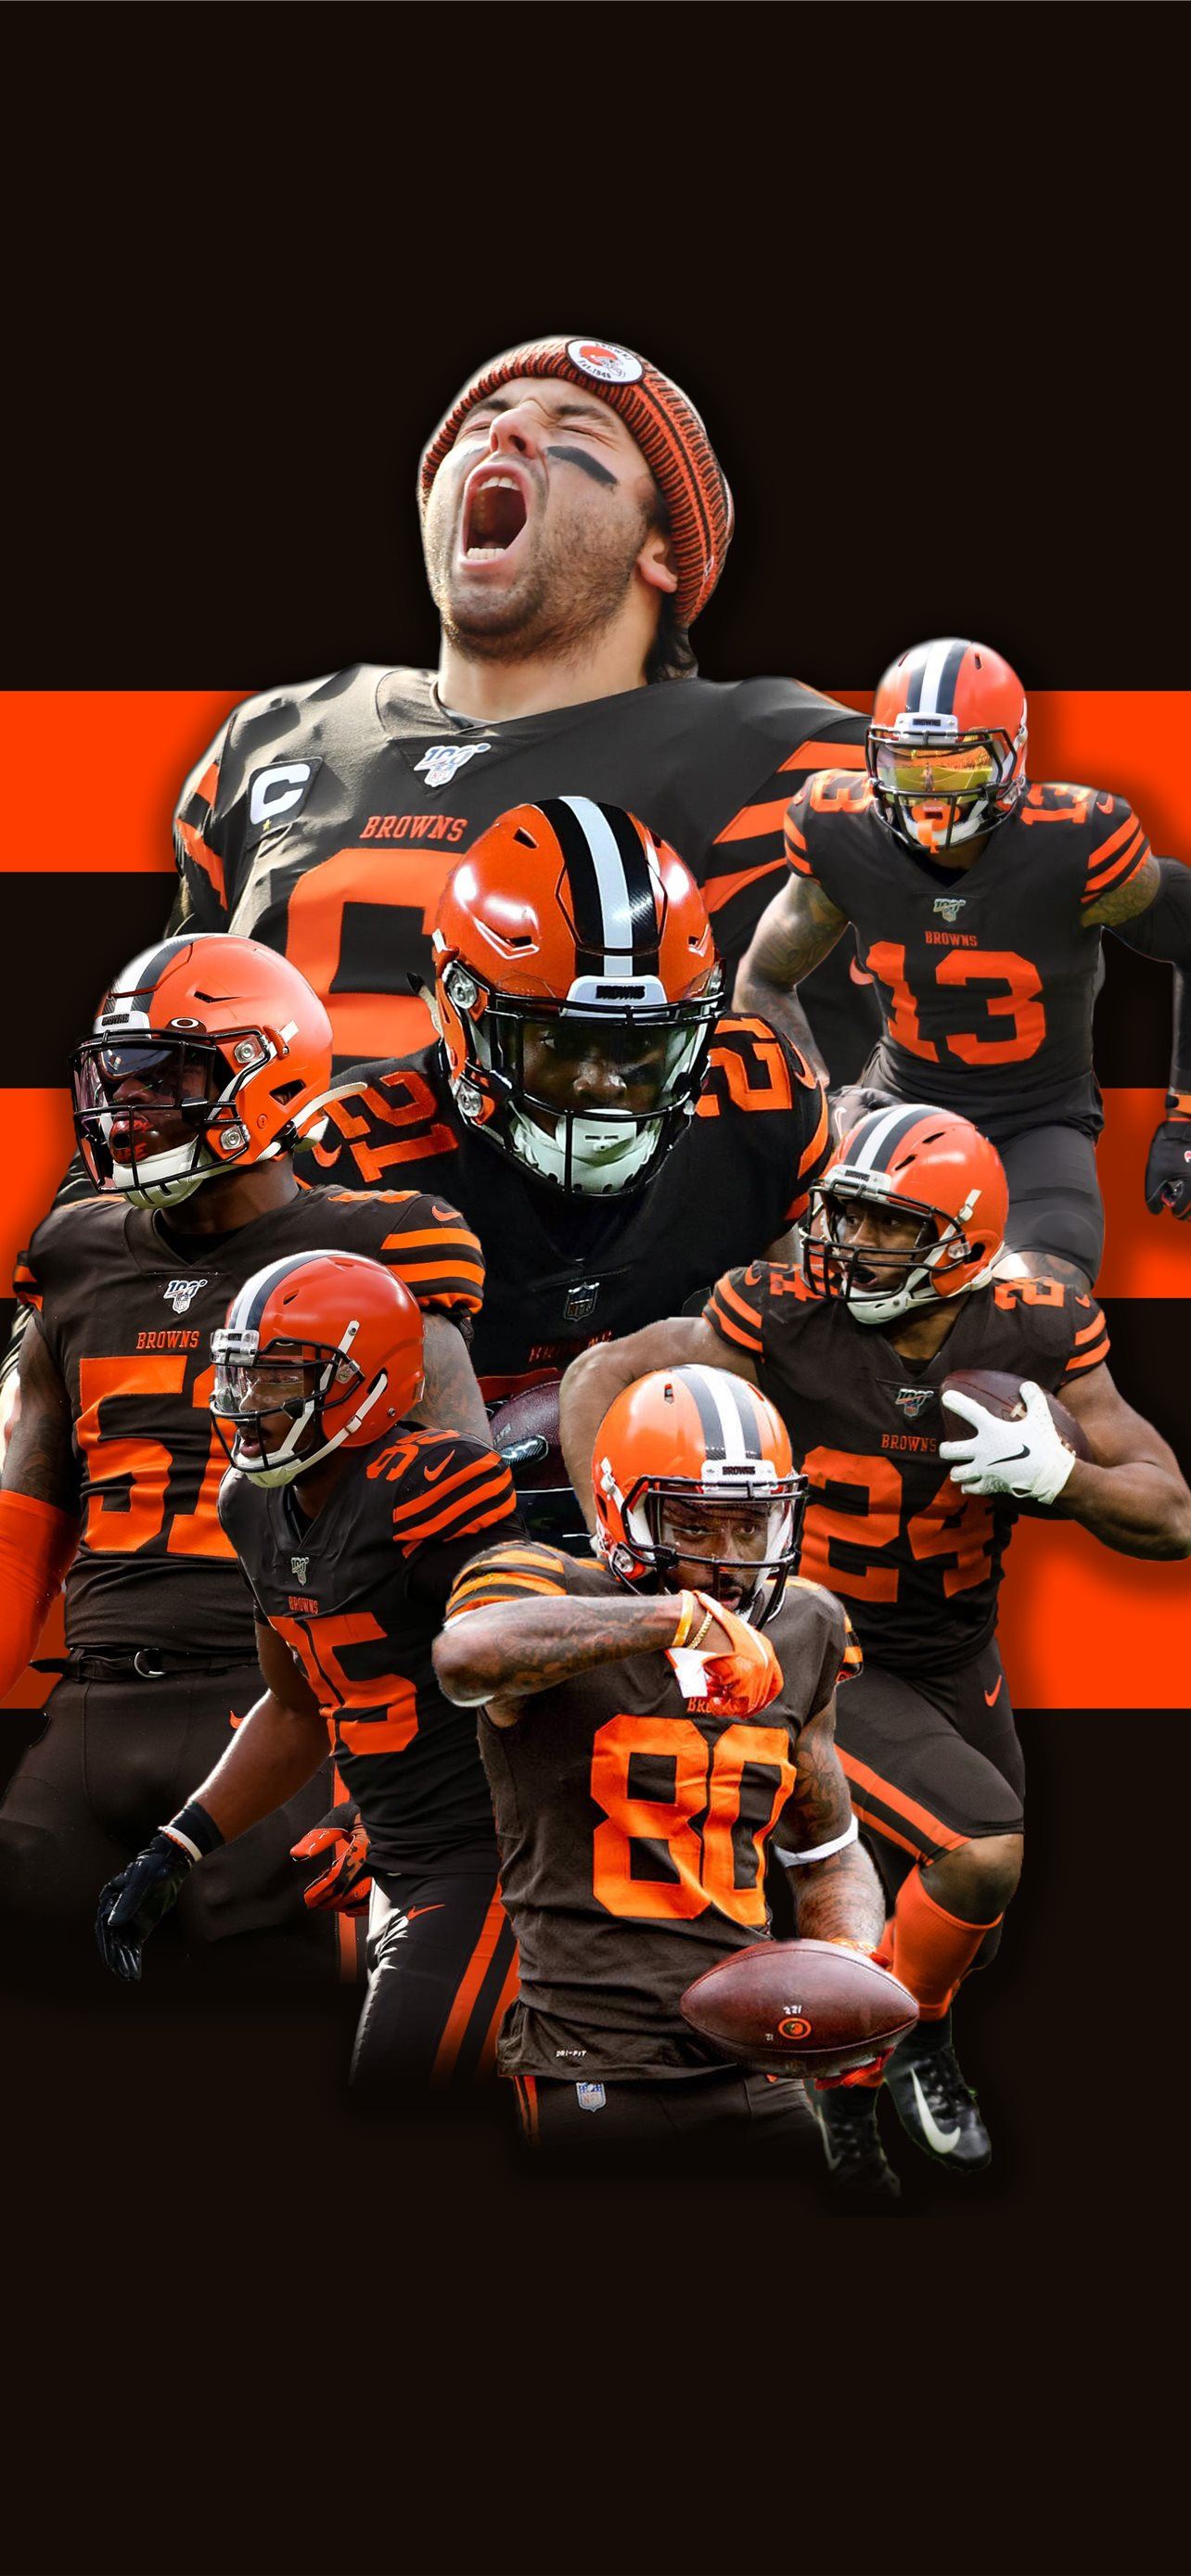 Download The official logo of the NFLs Cleveland Browns Wallpaper   Wallpaperscom